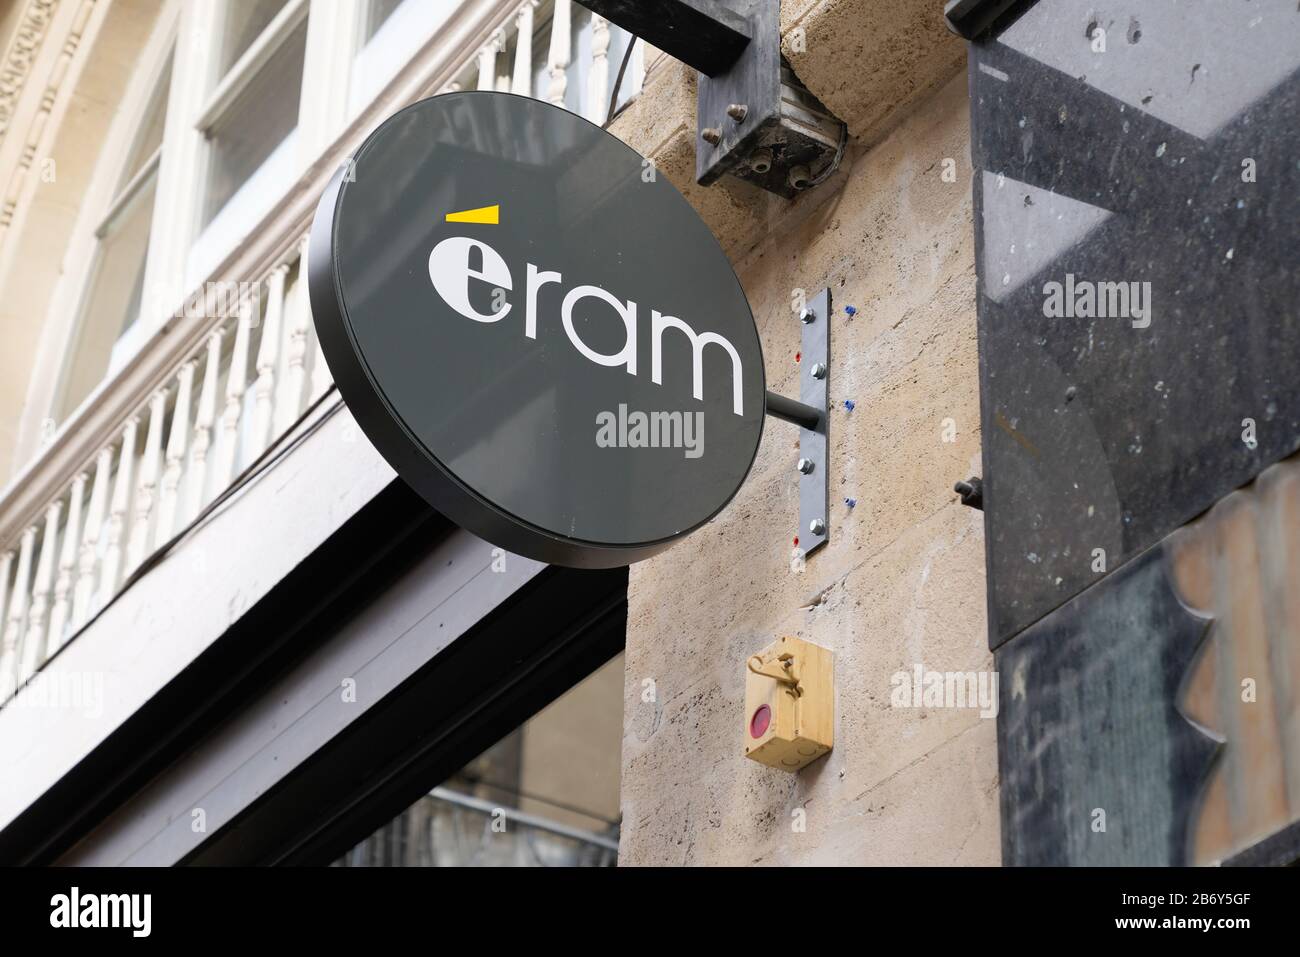 Bordeaux , Aquitaine / France - 10 28 2019 : Eram logo sign store French  brand shoes shop retailer specializing in footwear clothing Stock Photo -  Alamy